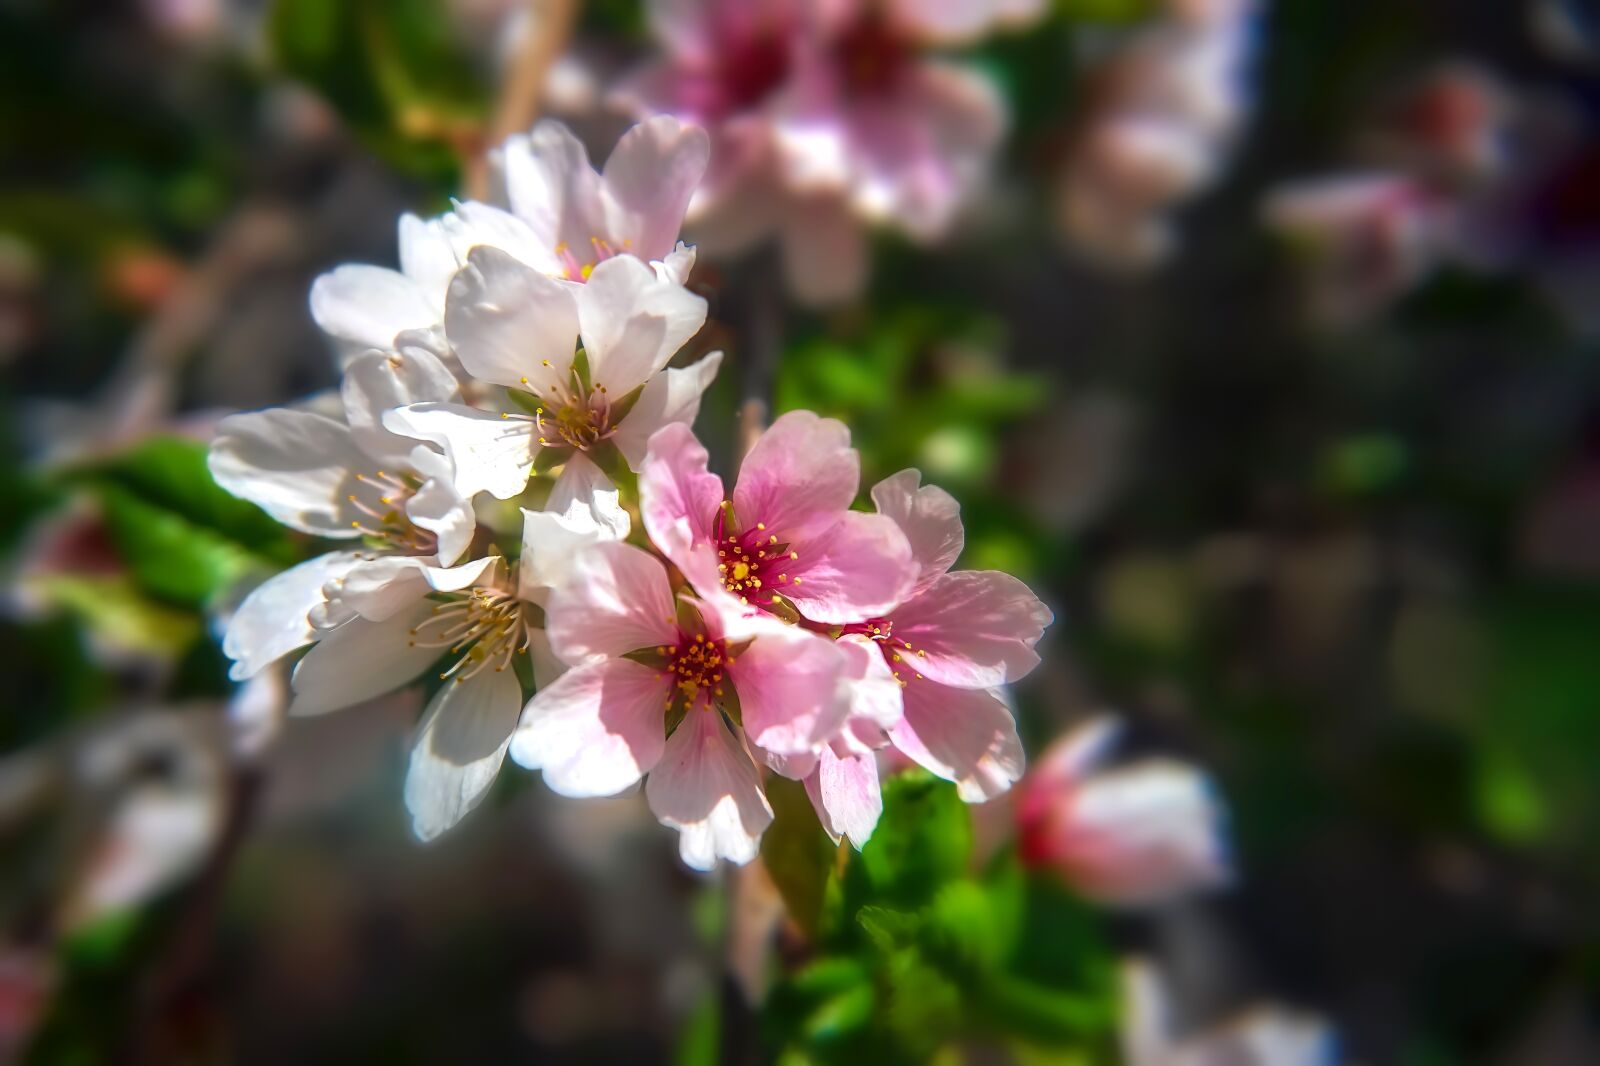 Sony a6300 sample photo. Flowers, blossoms, blooms photography